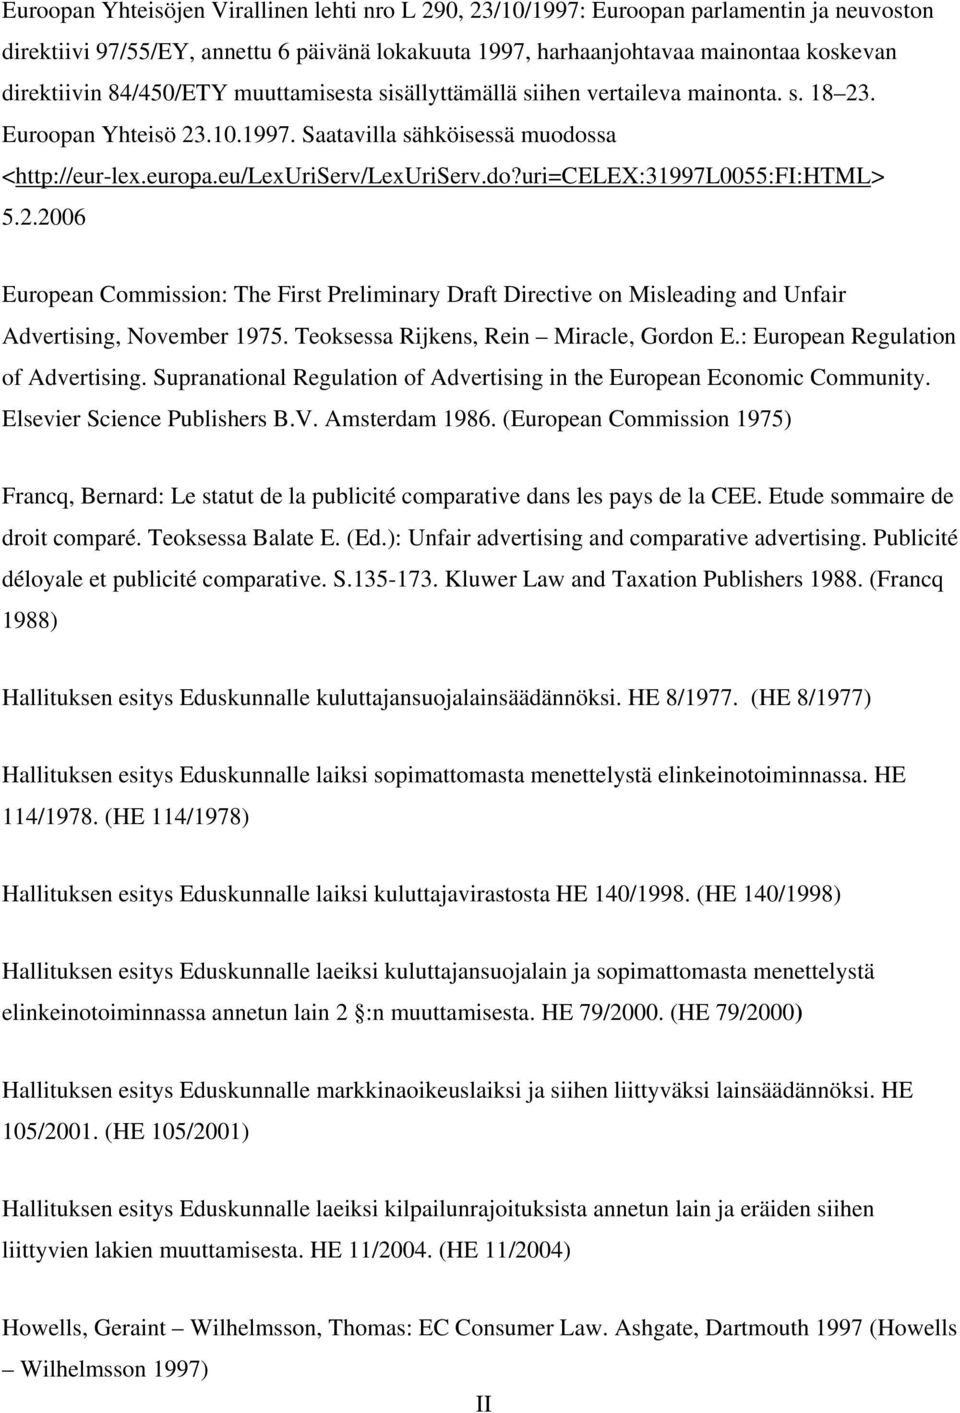 2.2006 European Commission: The First Preliminary Draft Directive on Misleading and Unfair Advertising, November 1975. Teoksessa Rijkens, Rein Miracle, Gordon E.: European Regulation of Advertising.